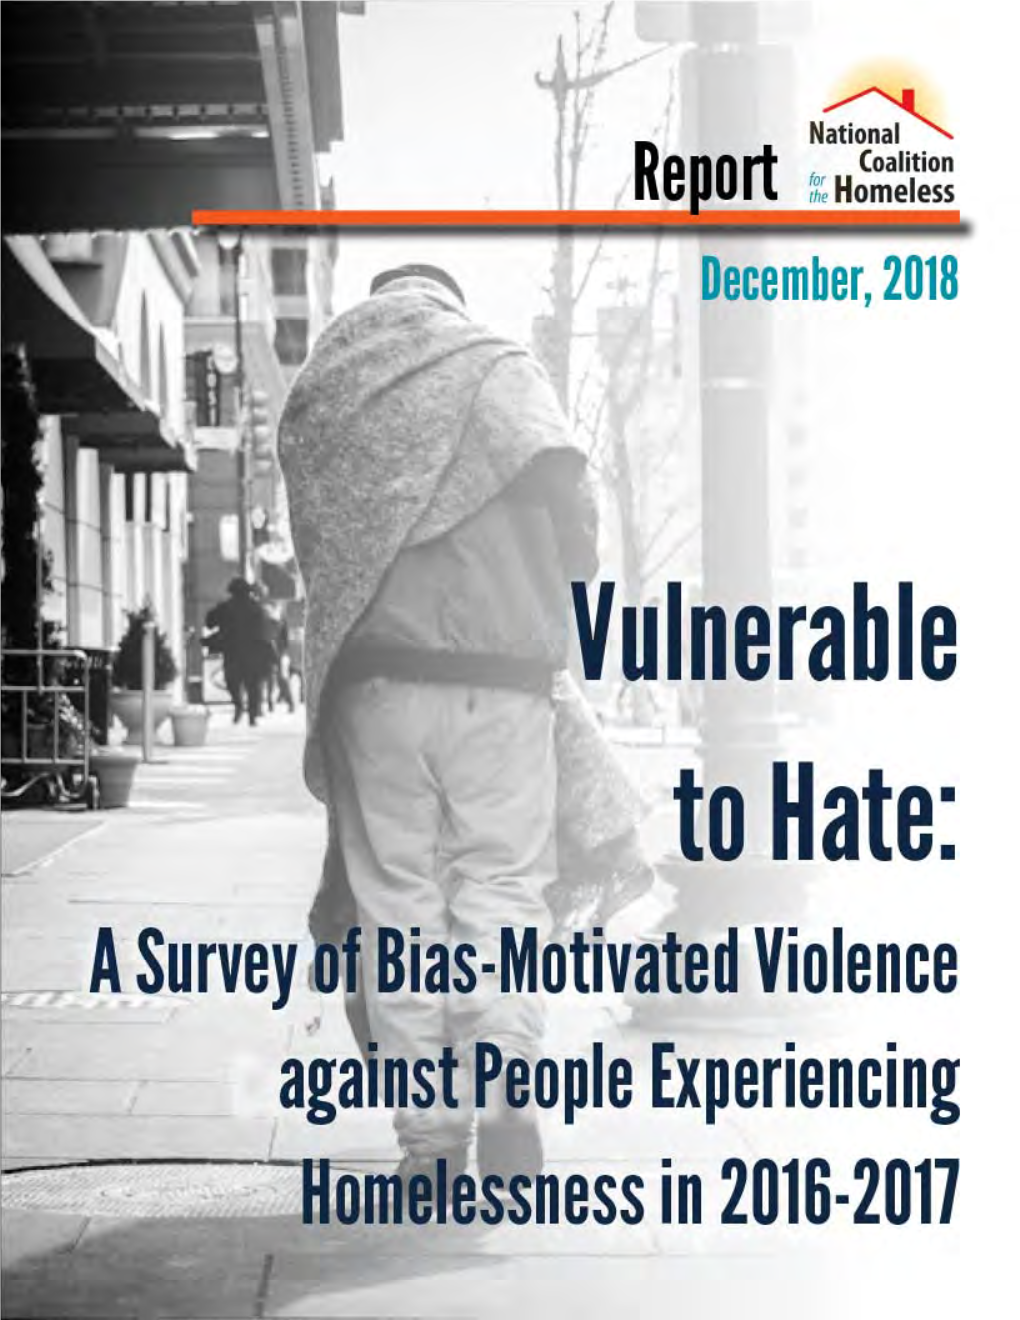 Vulnerable to Hate 22 National Coalition for the Homeless Such As Campsites, Parks, Or Transportation Facilities (The Mckinney-Vento Homeless Assistance Act, 2009)